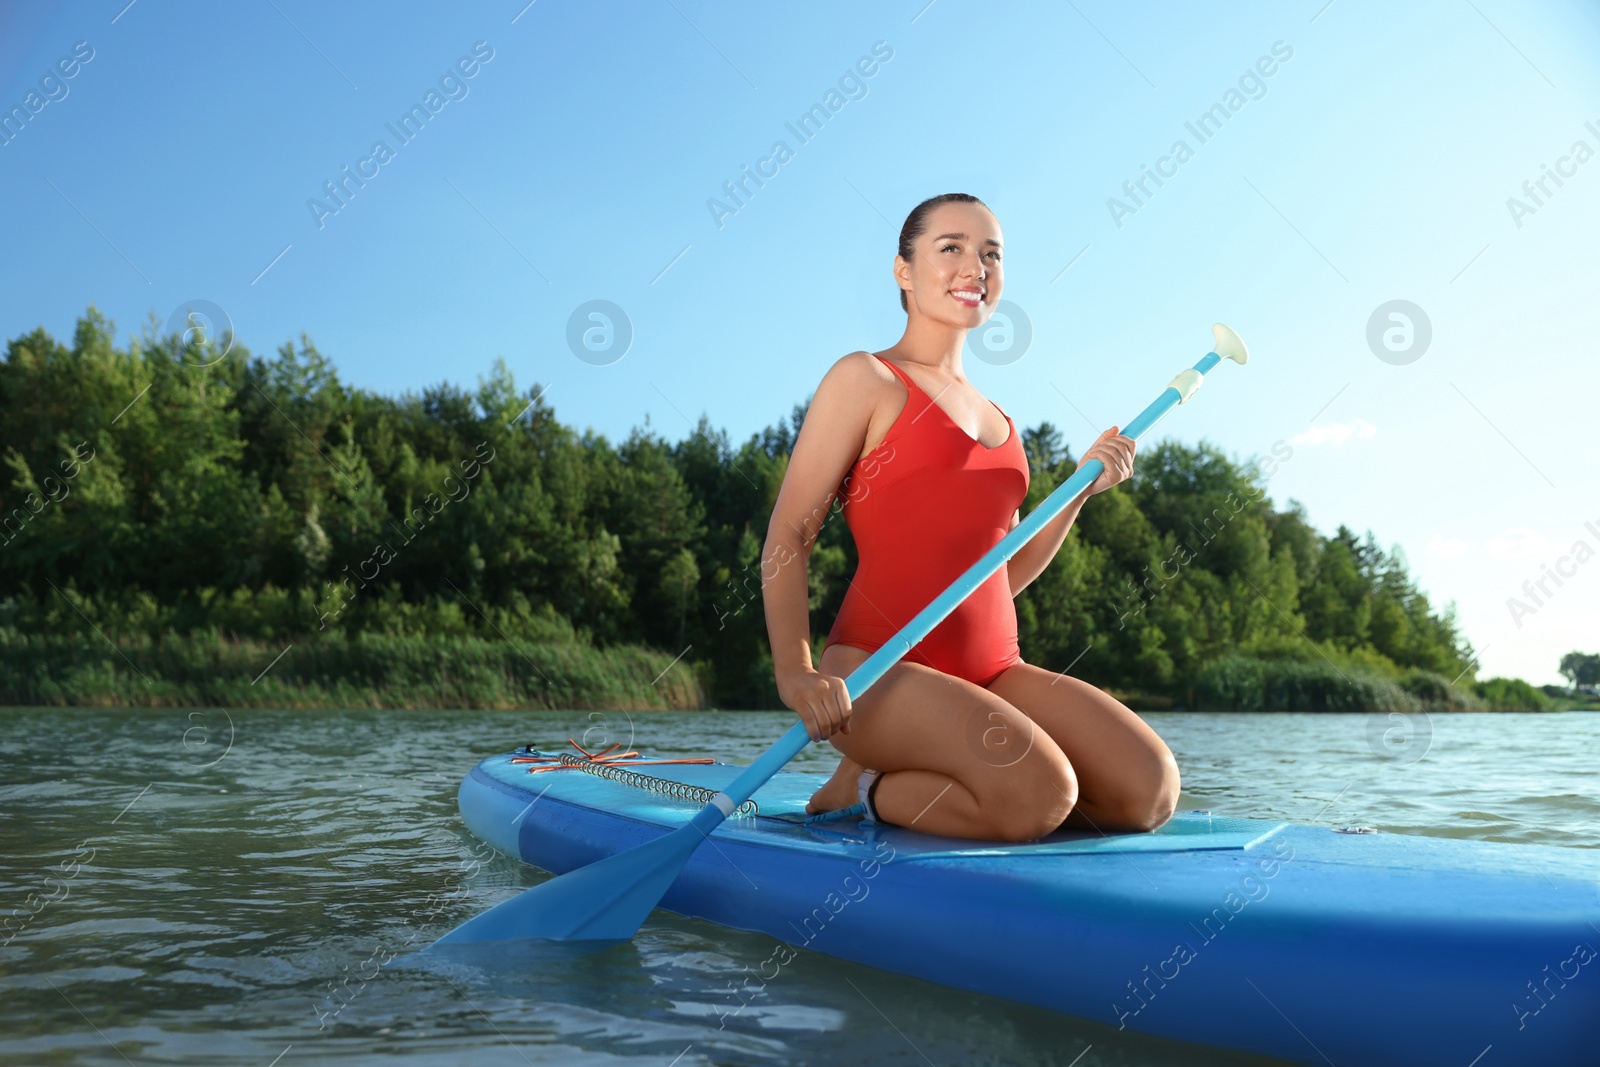 Photo of Woman paddle boarding on SUP board in river